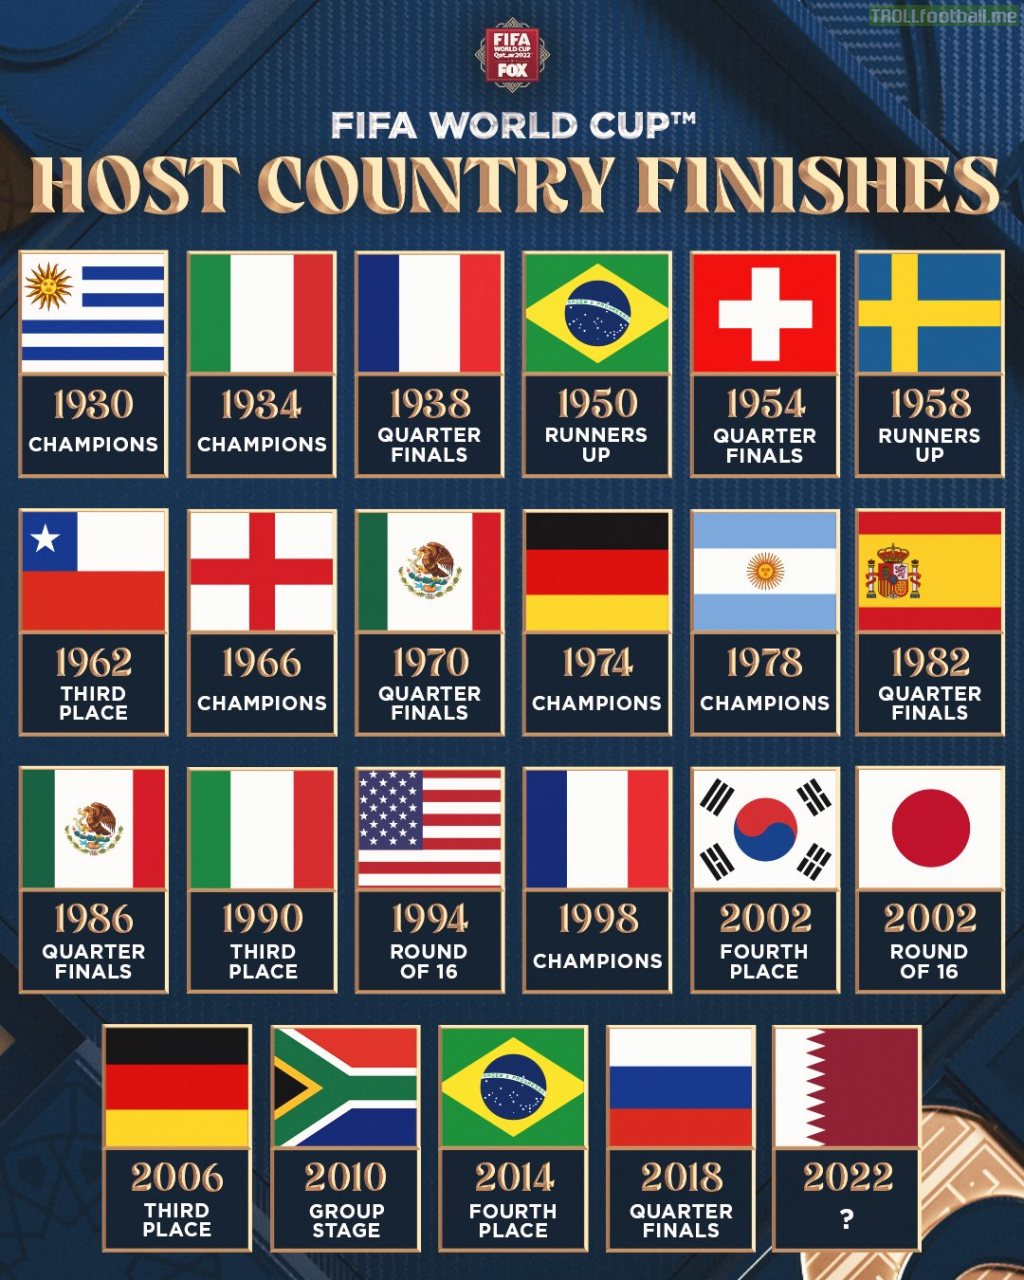 Every host country's finish at the FIFA World Cup!